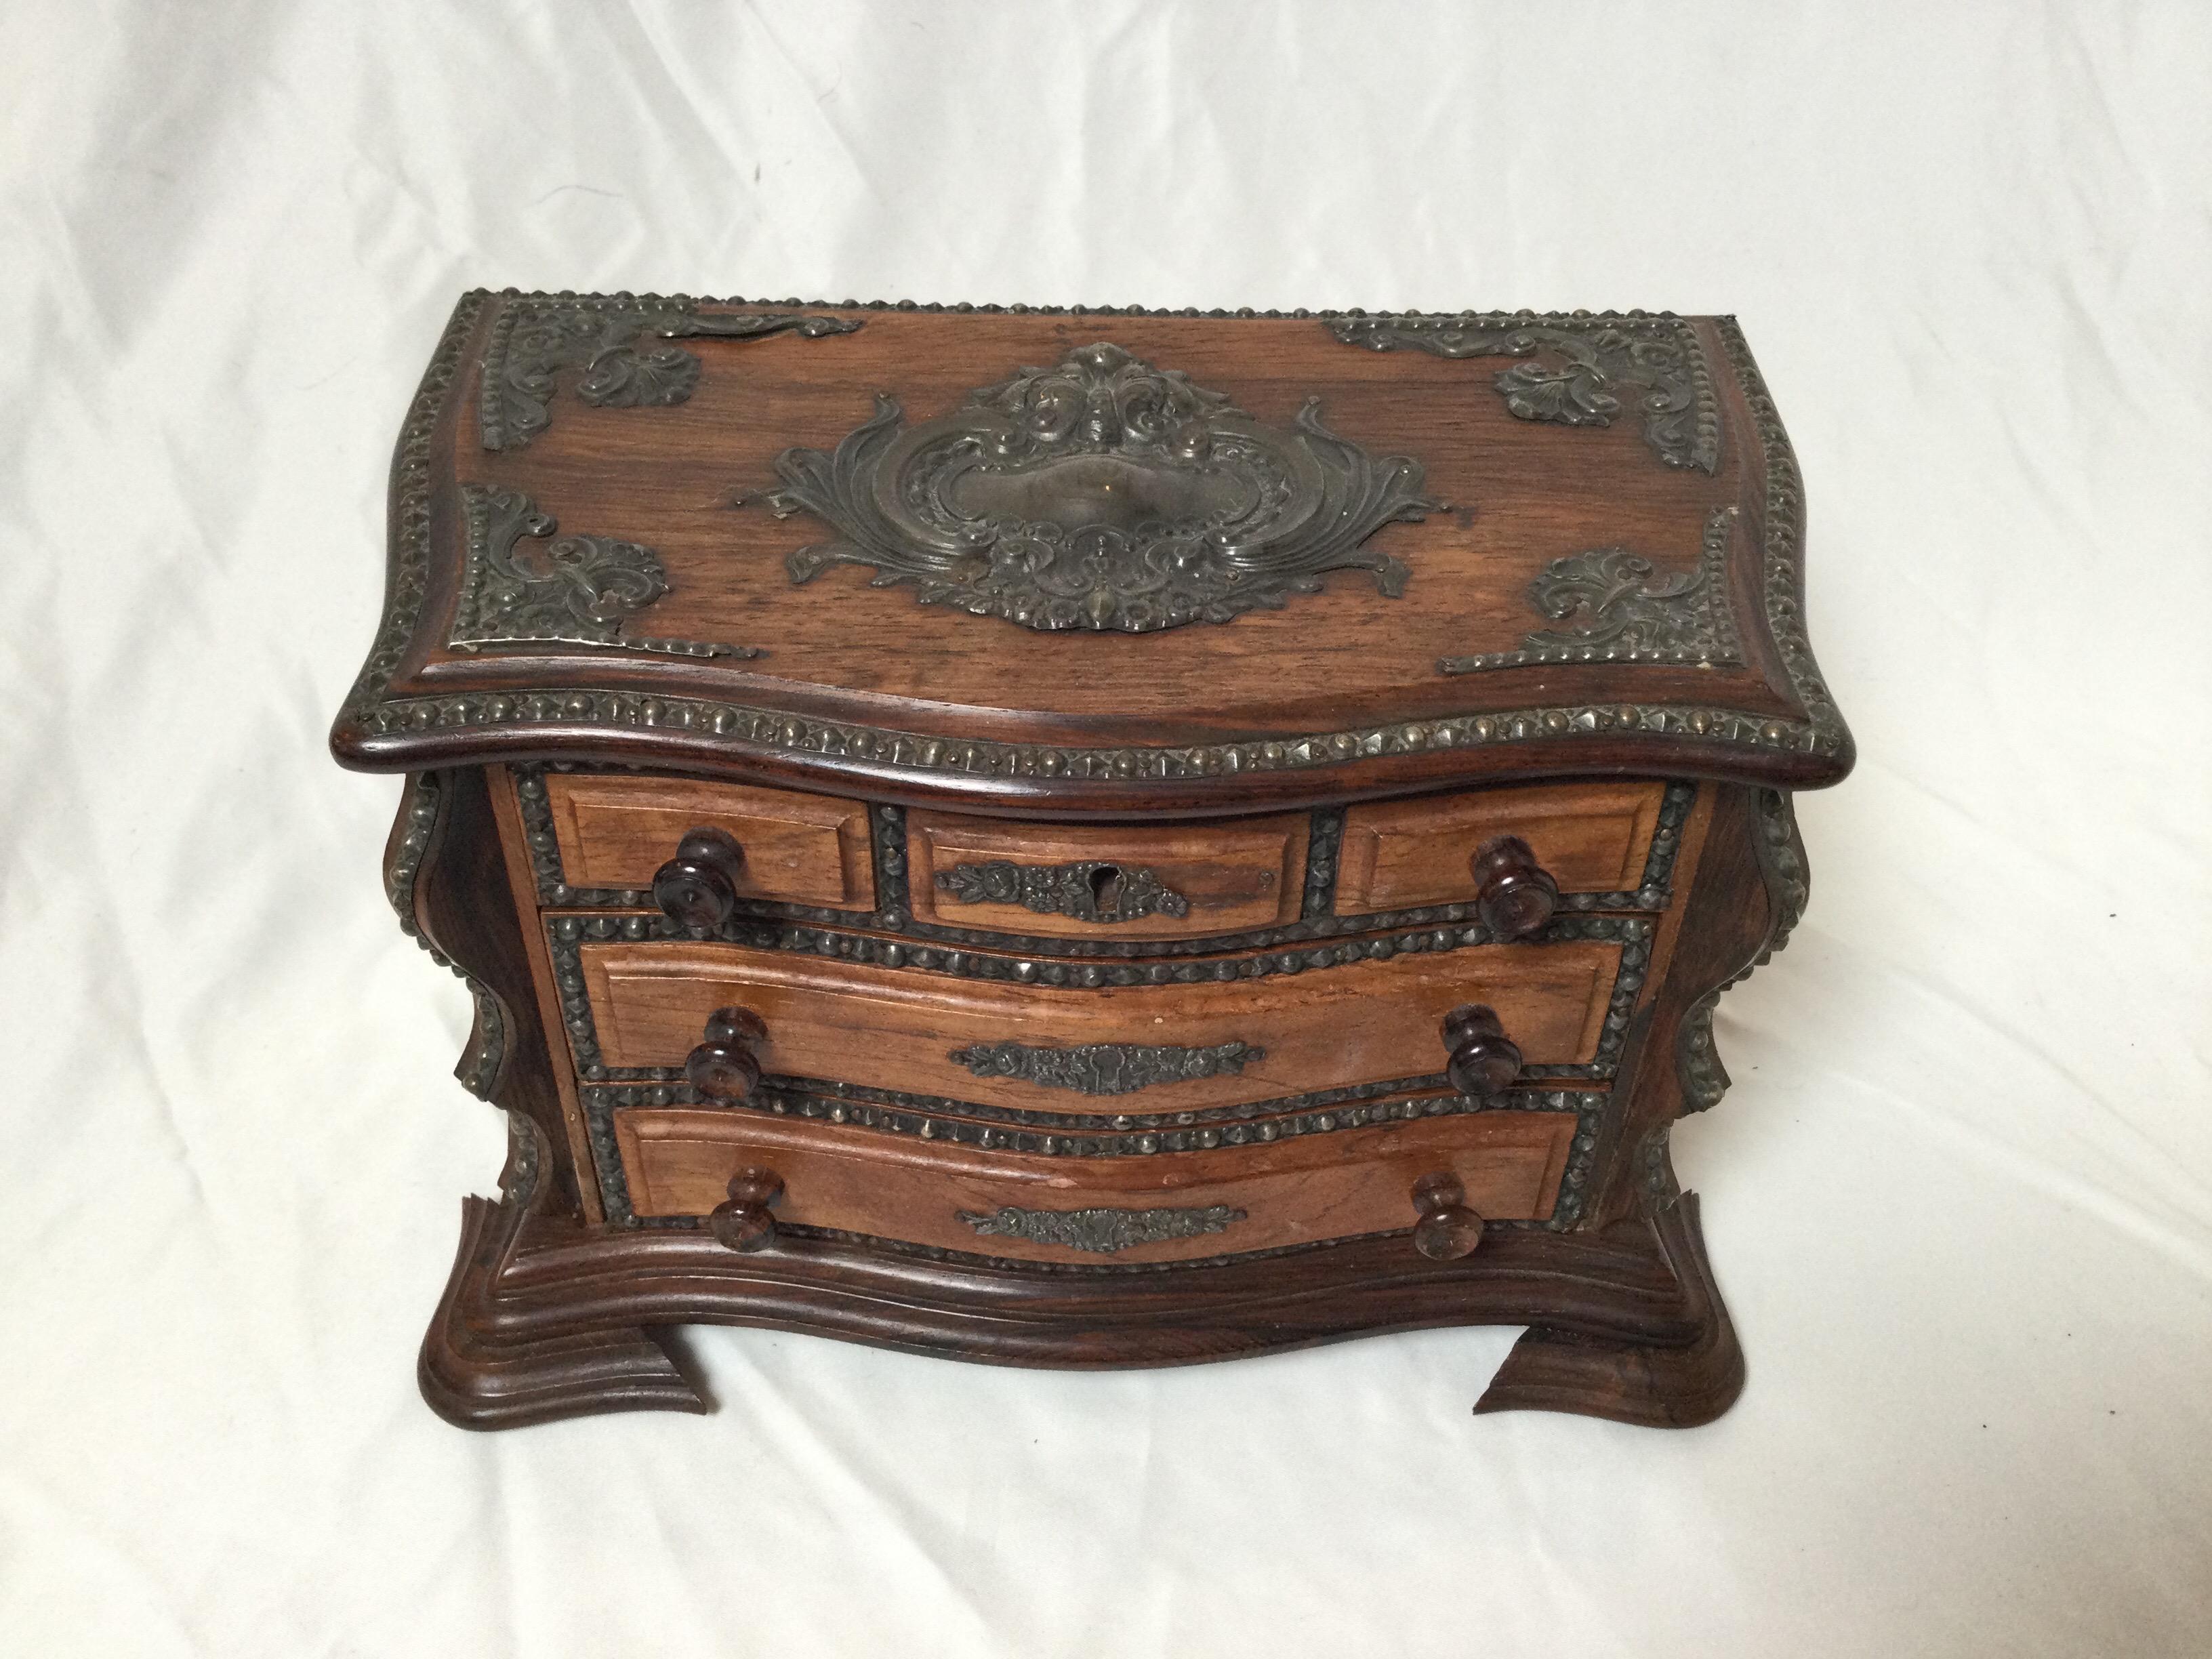 Diminutive rosewood chest of drawers with dark silver mounts. The miniature chest with drawer front with two lower working drawers. The top section lifts to reveal storage. Perfect trinket jewelry box.